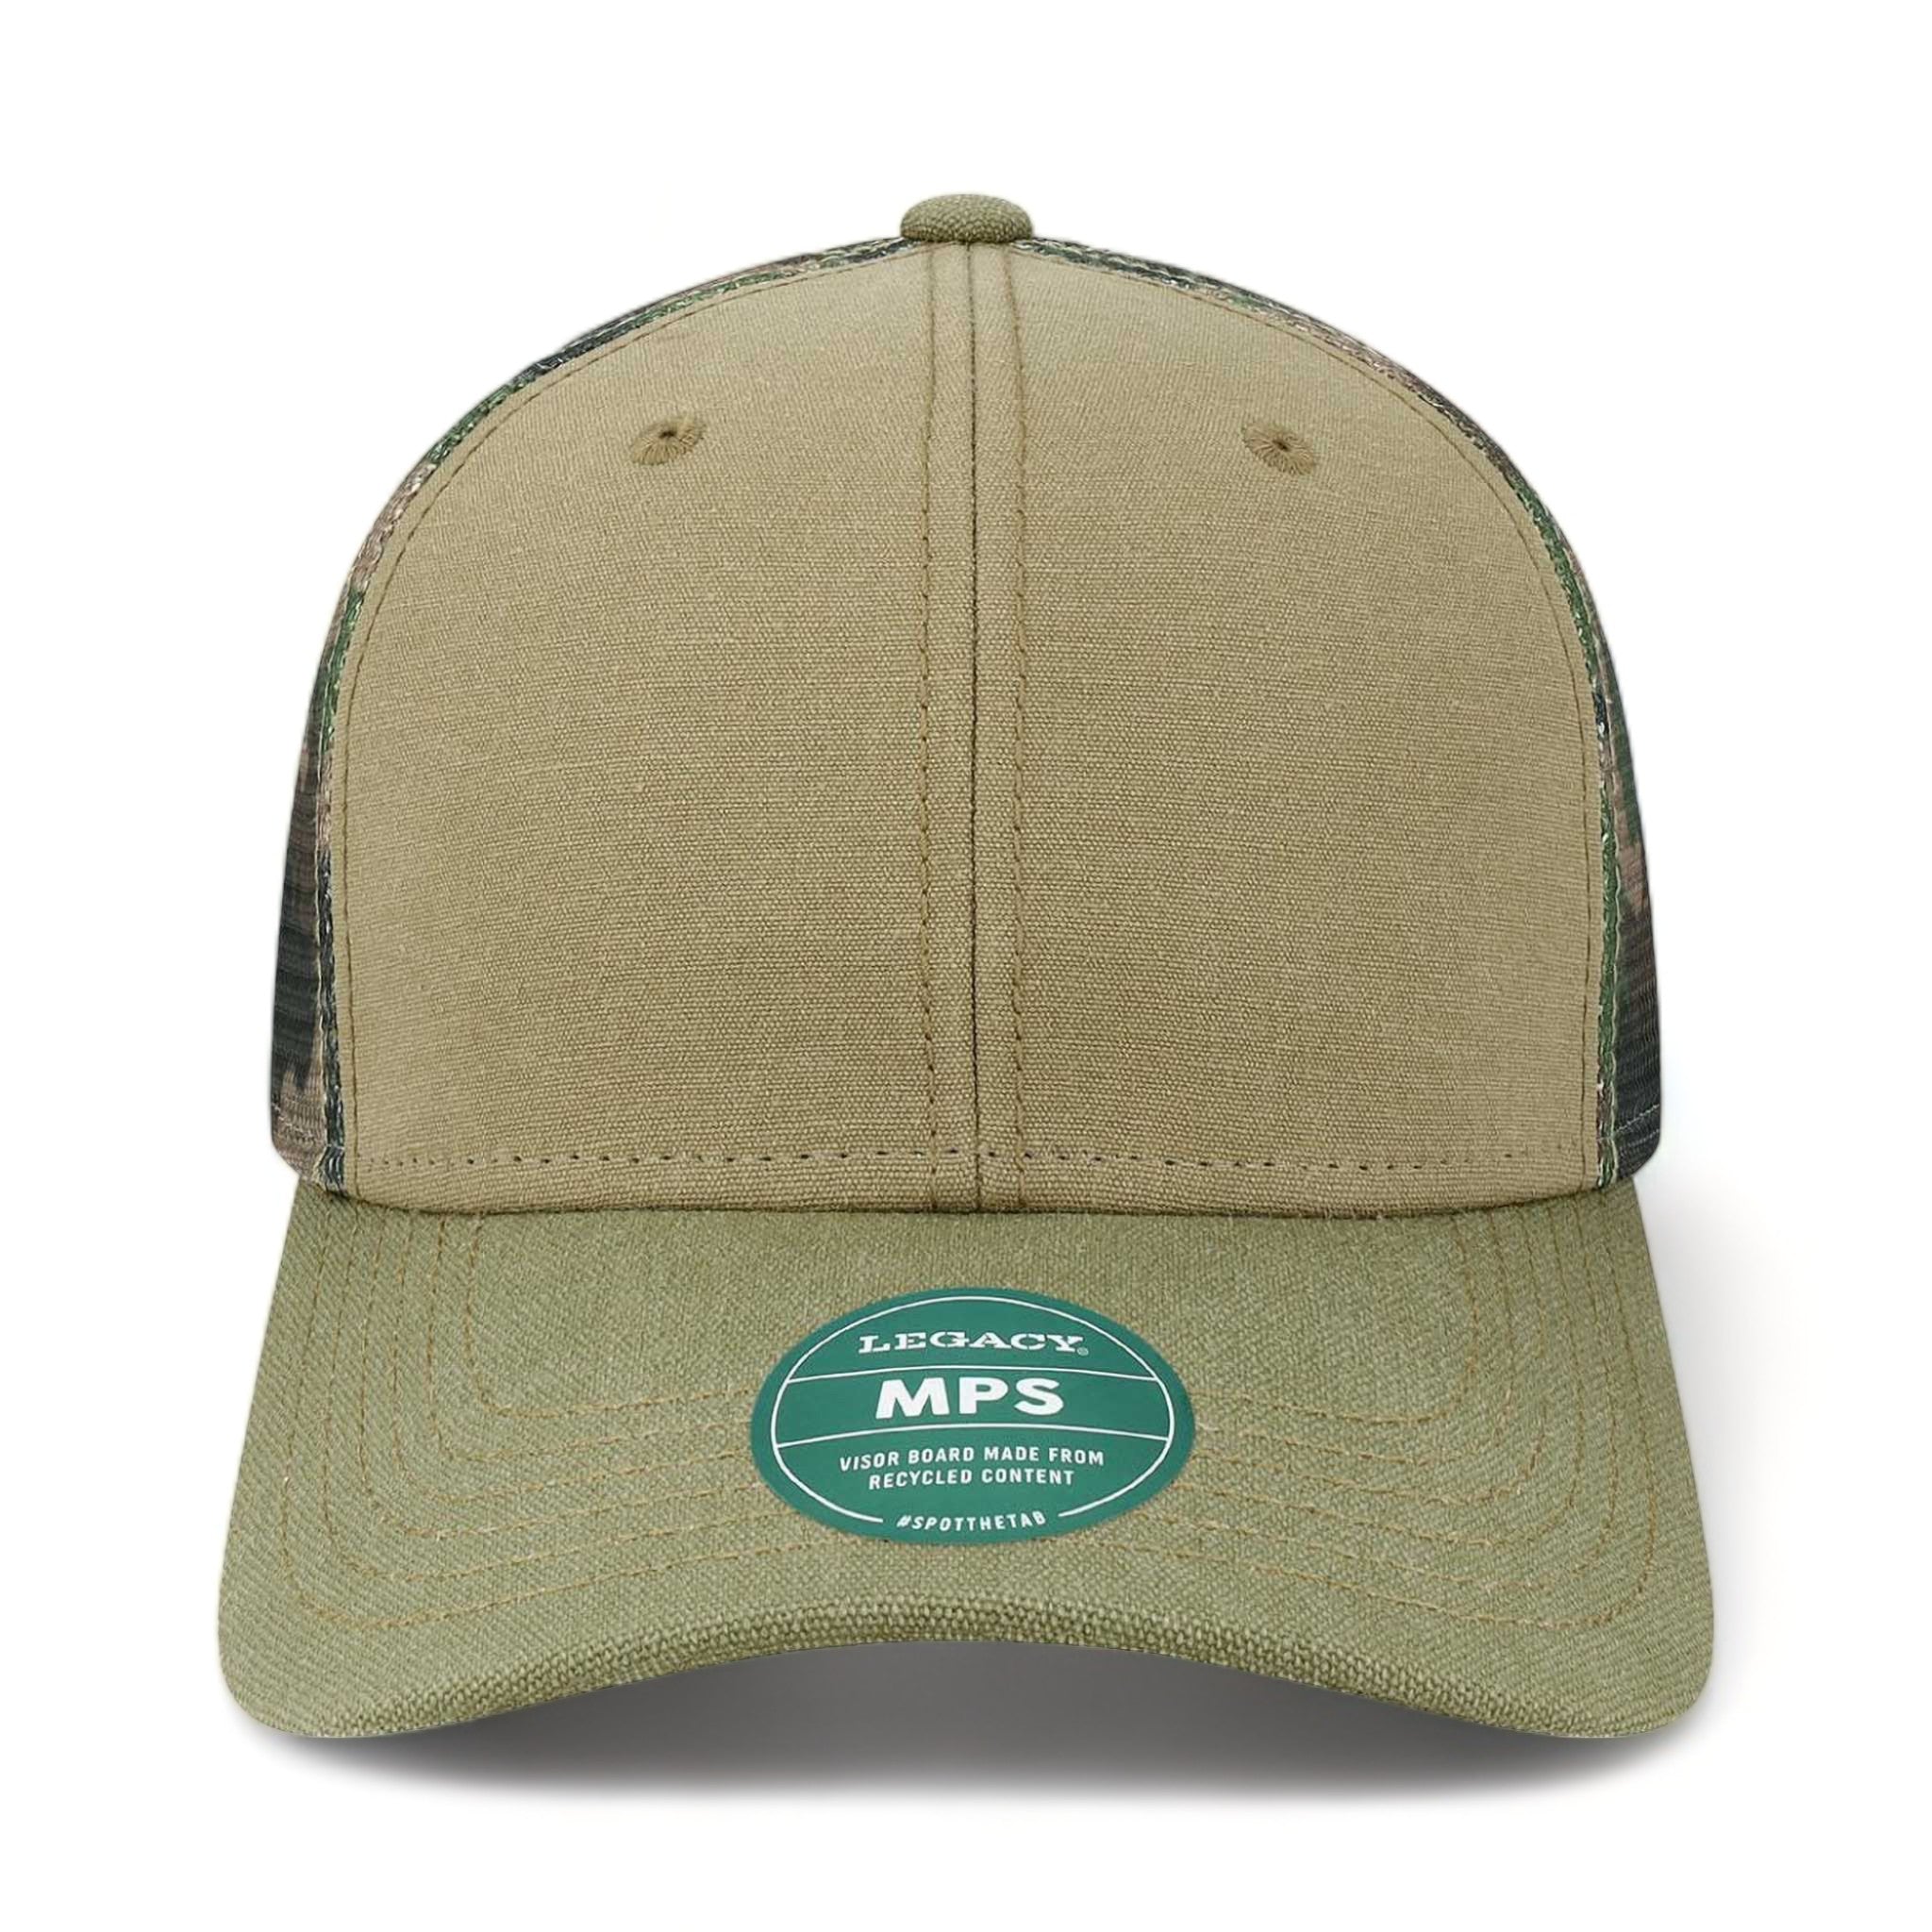 Front view of LEGACY MPS custom hat in khaki, sage and camo mesh